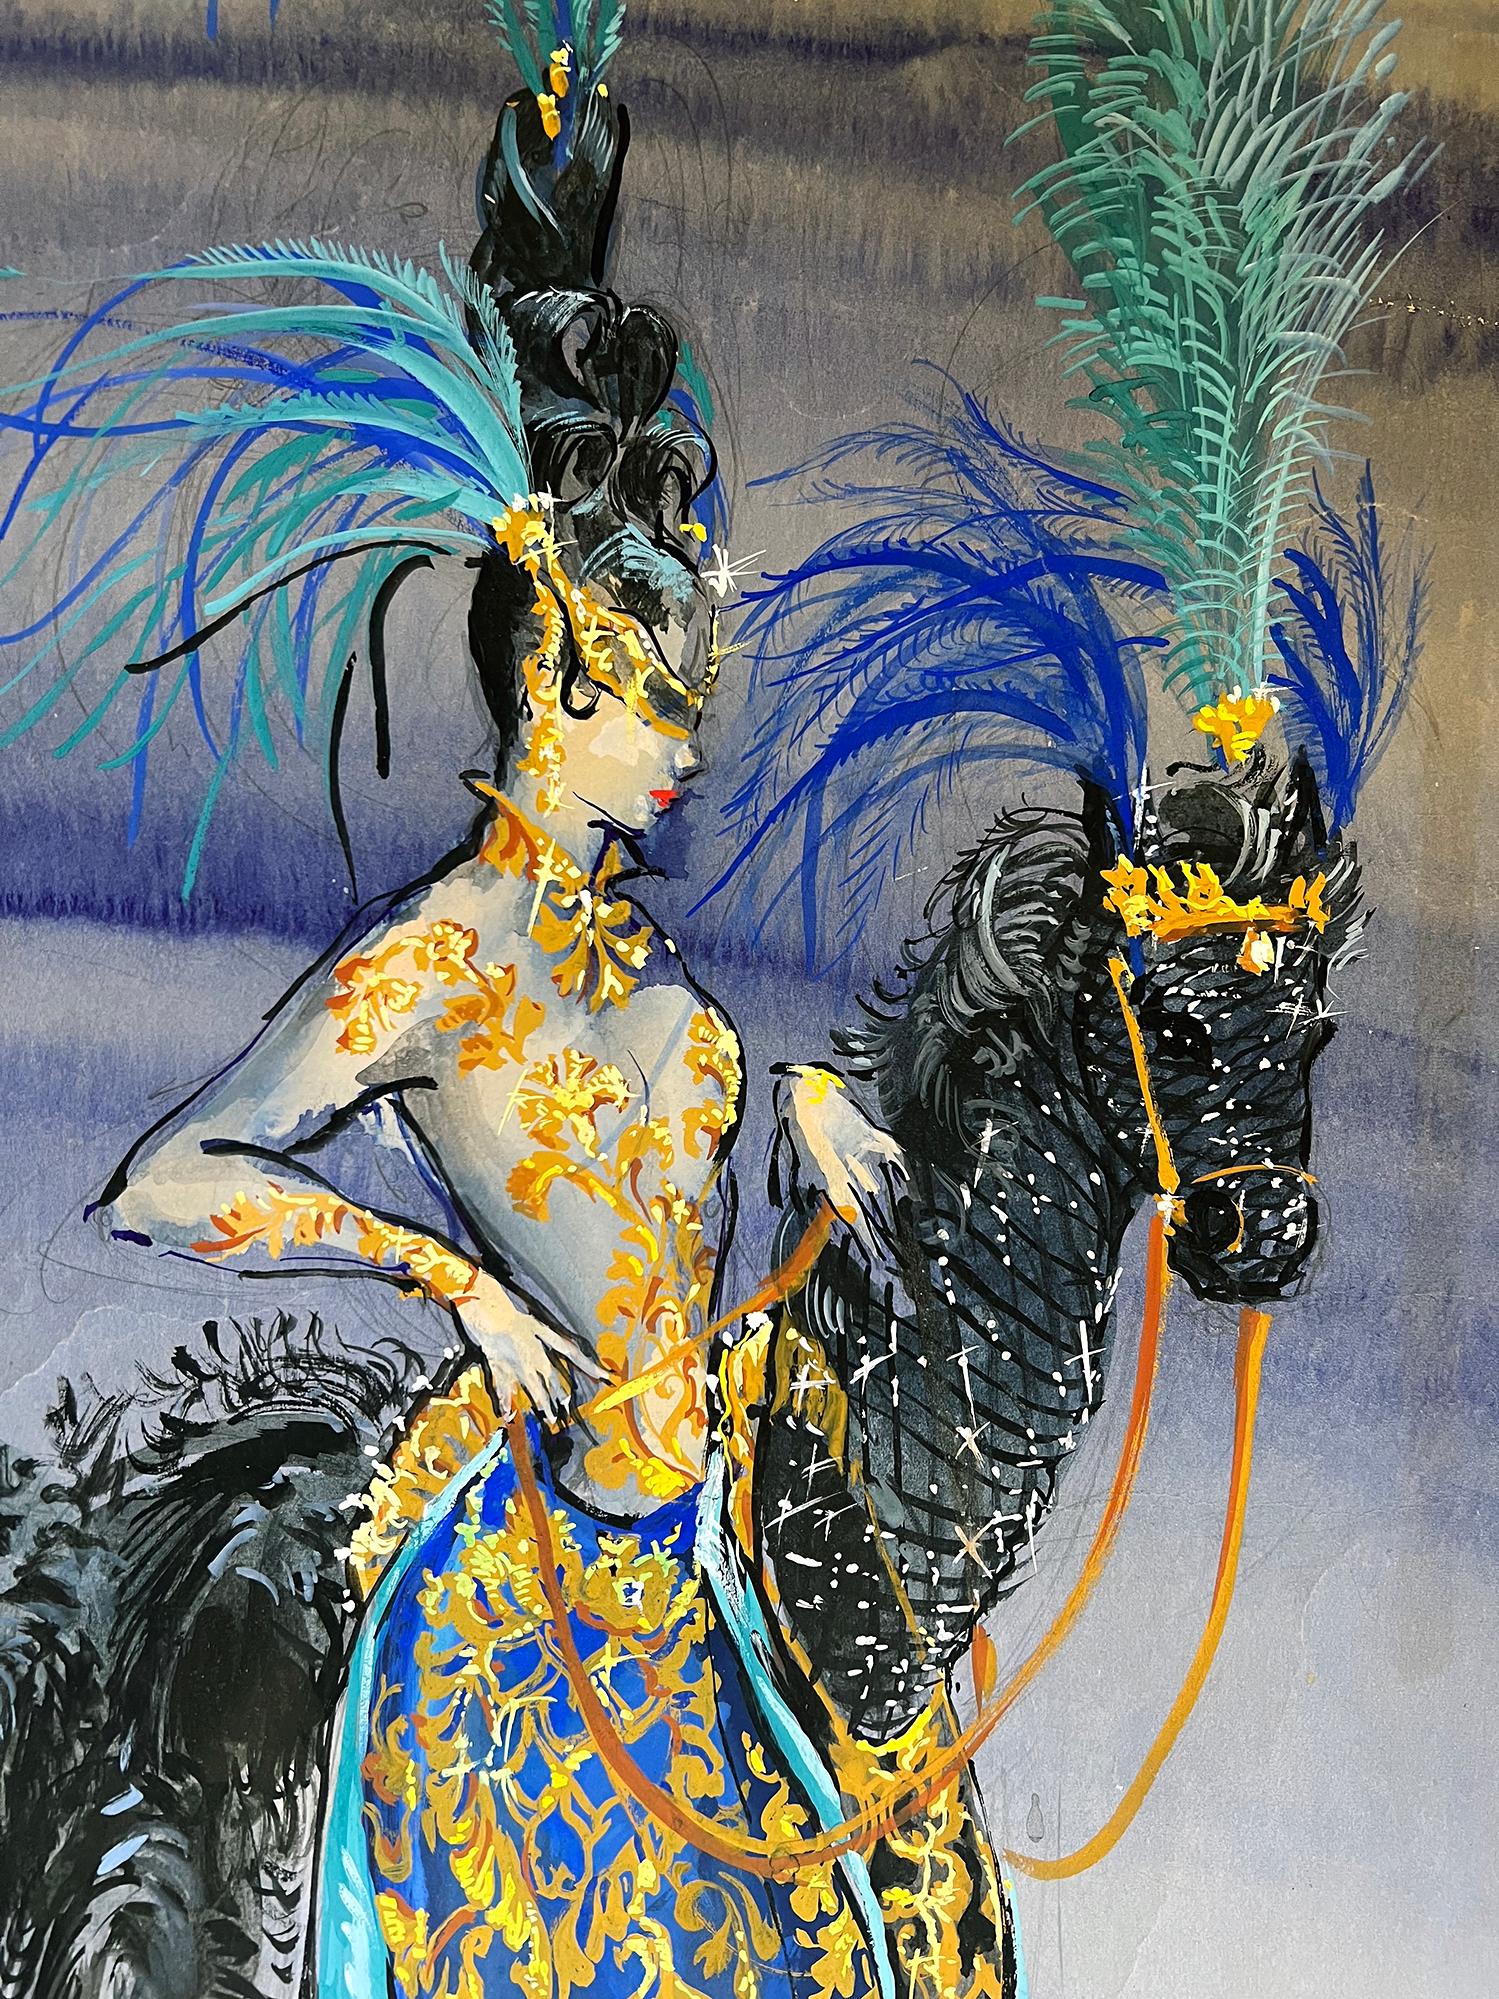 Show Girl with Fantasy Horse, Fashion Illustration in Blue and Black - Art by Freddy Wittop 